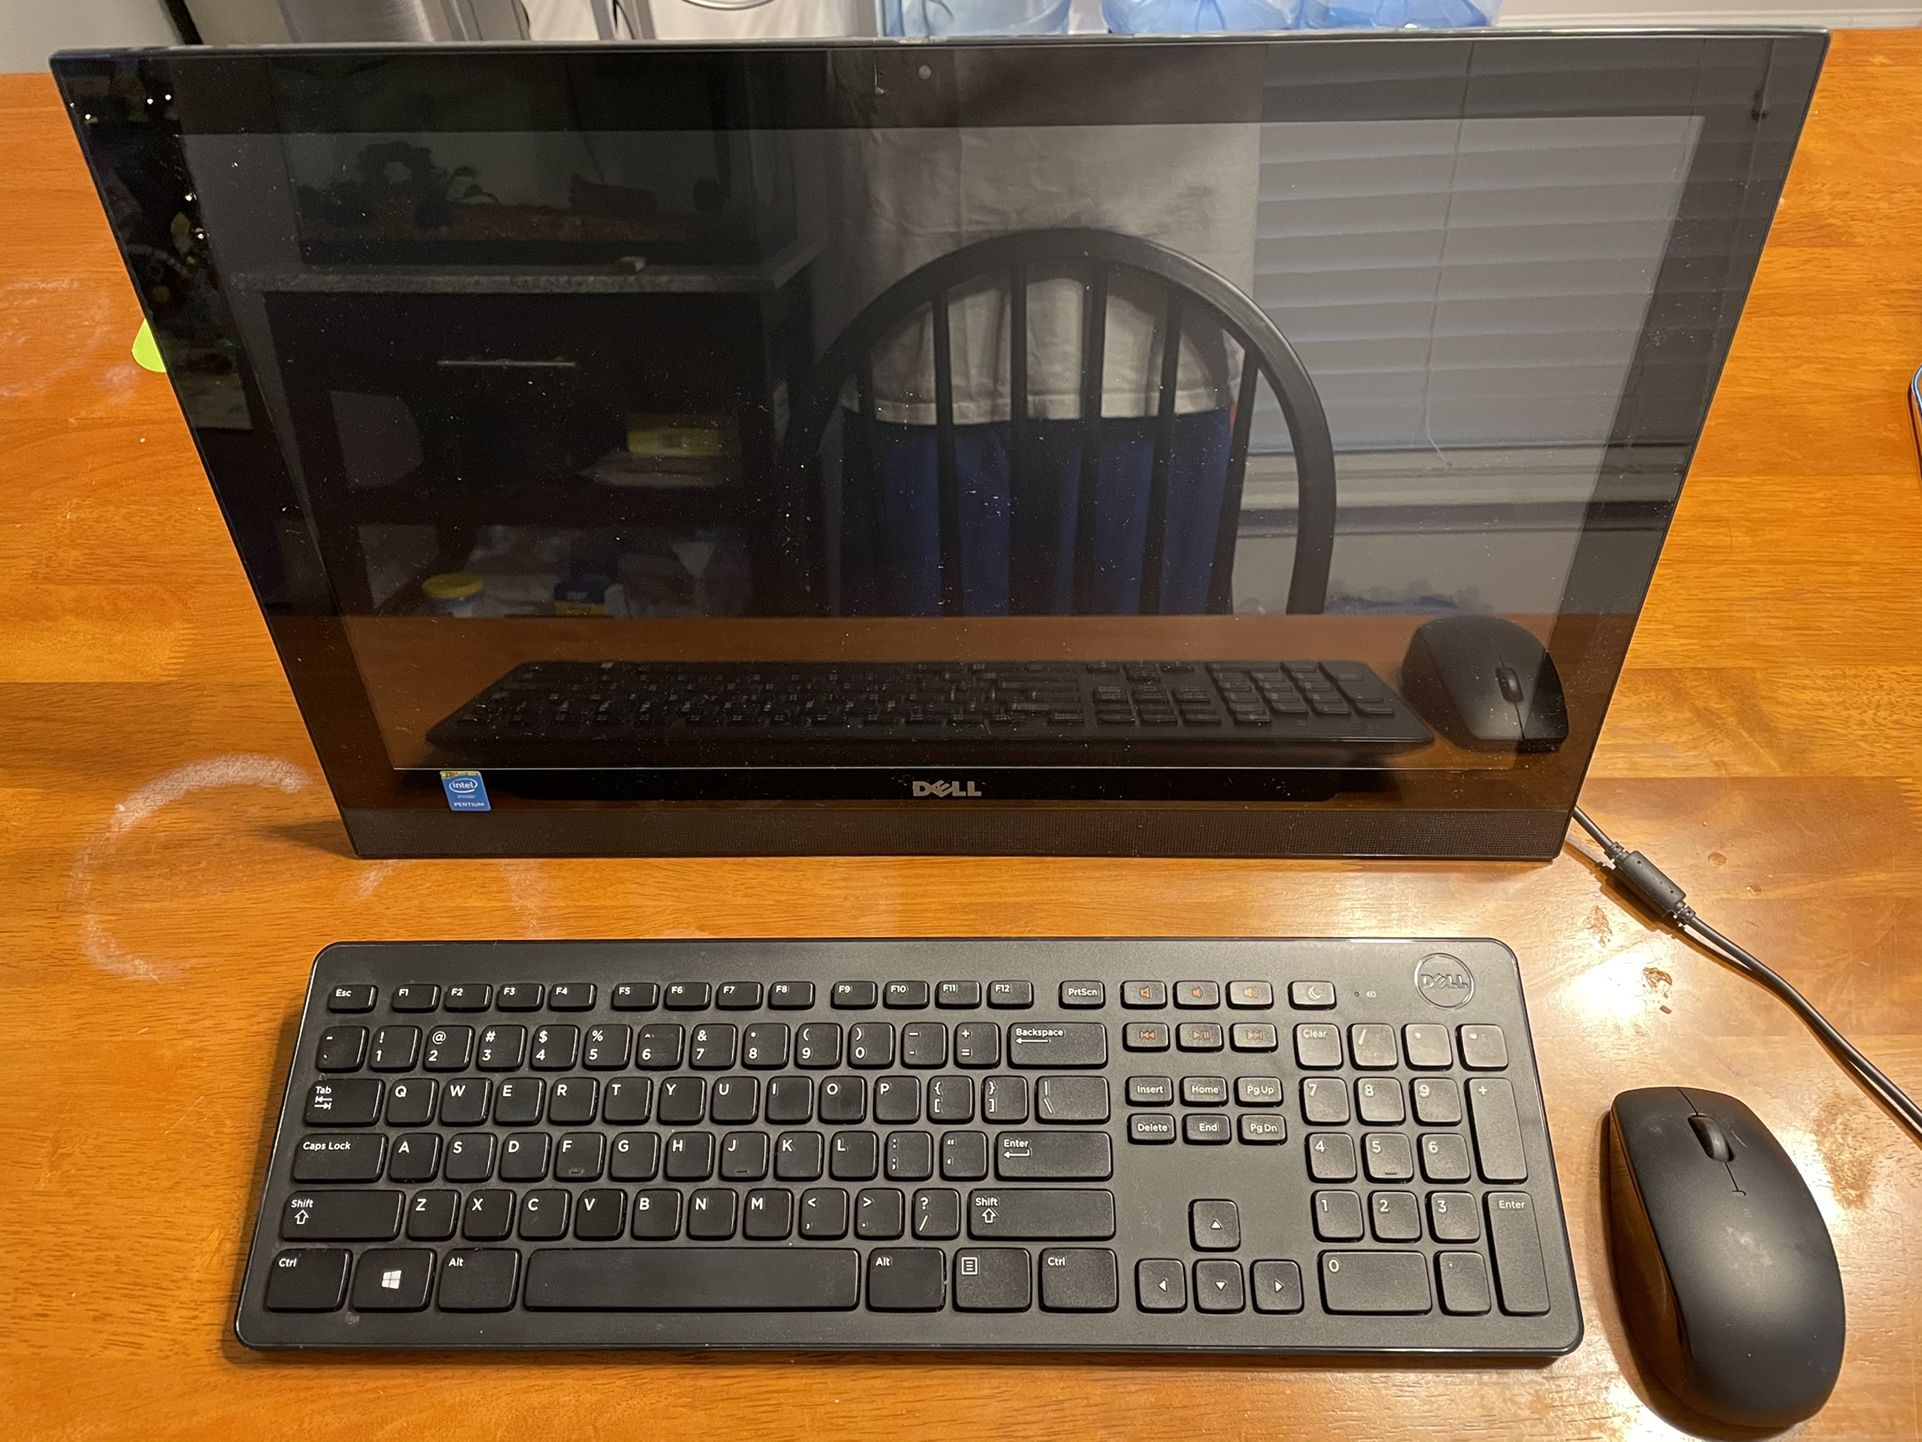 Dell Windows 10 All-in-one touch screen computer with wireless keyboard and mouse